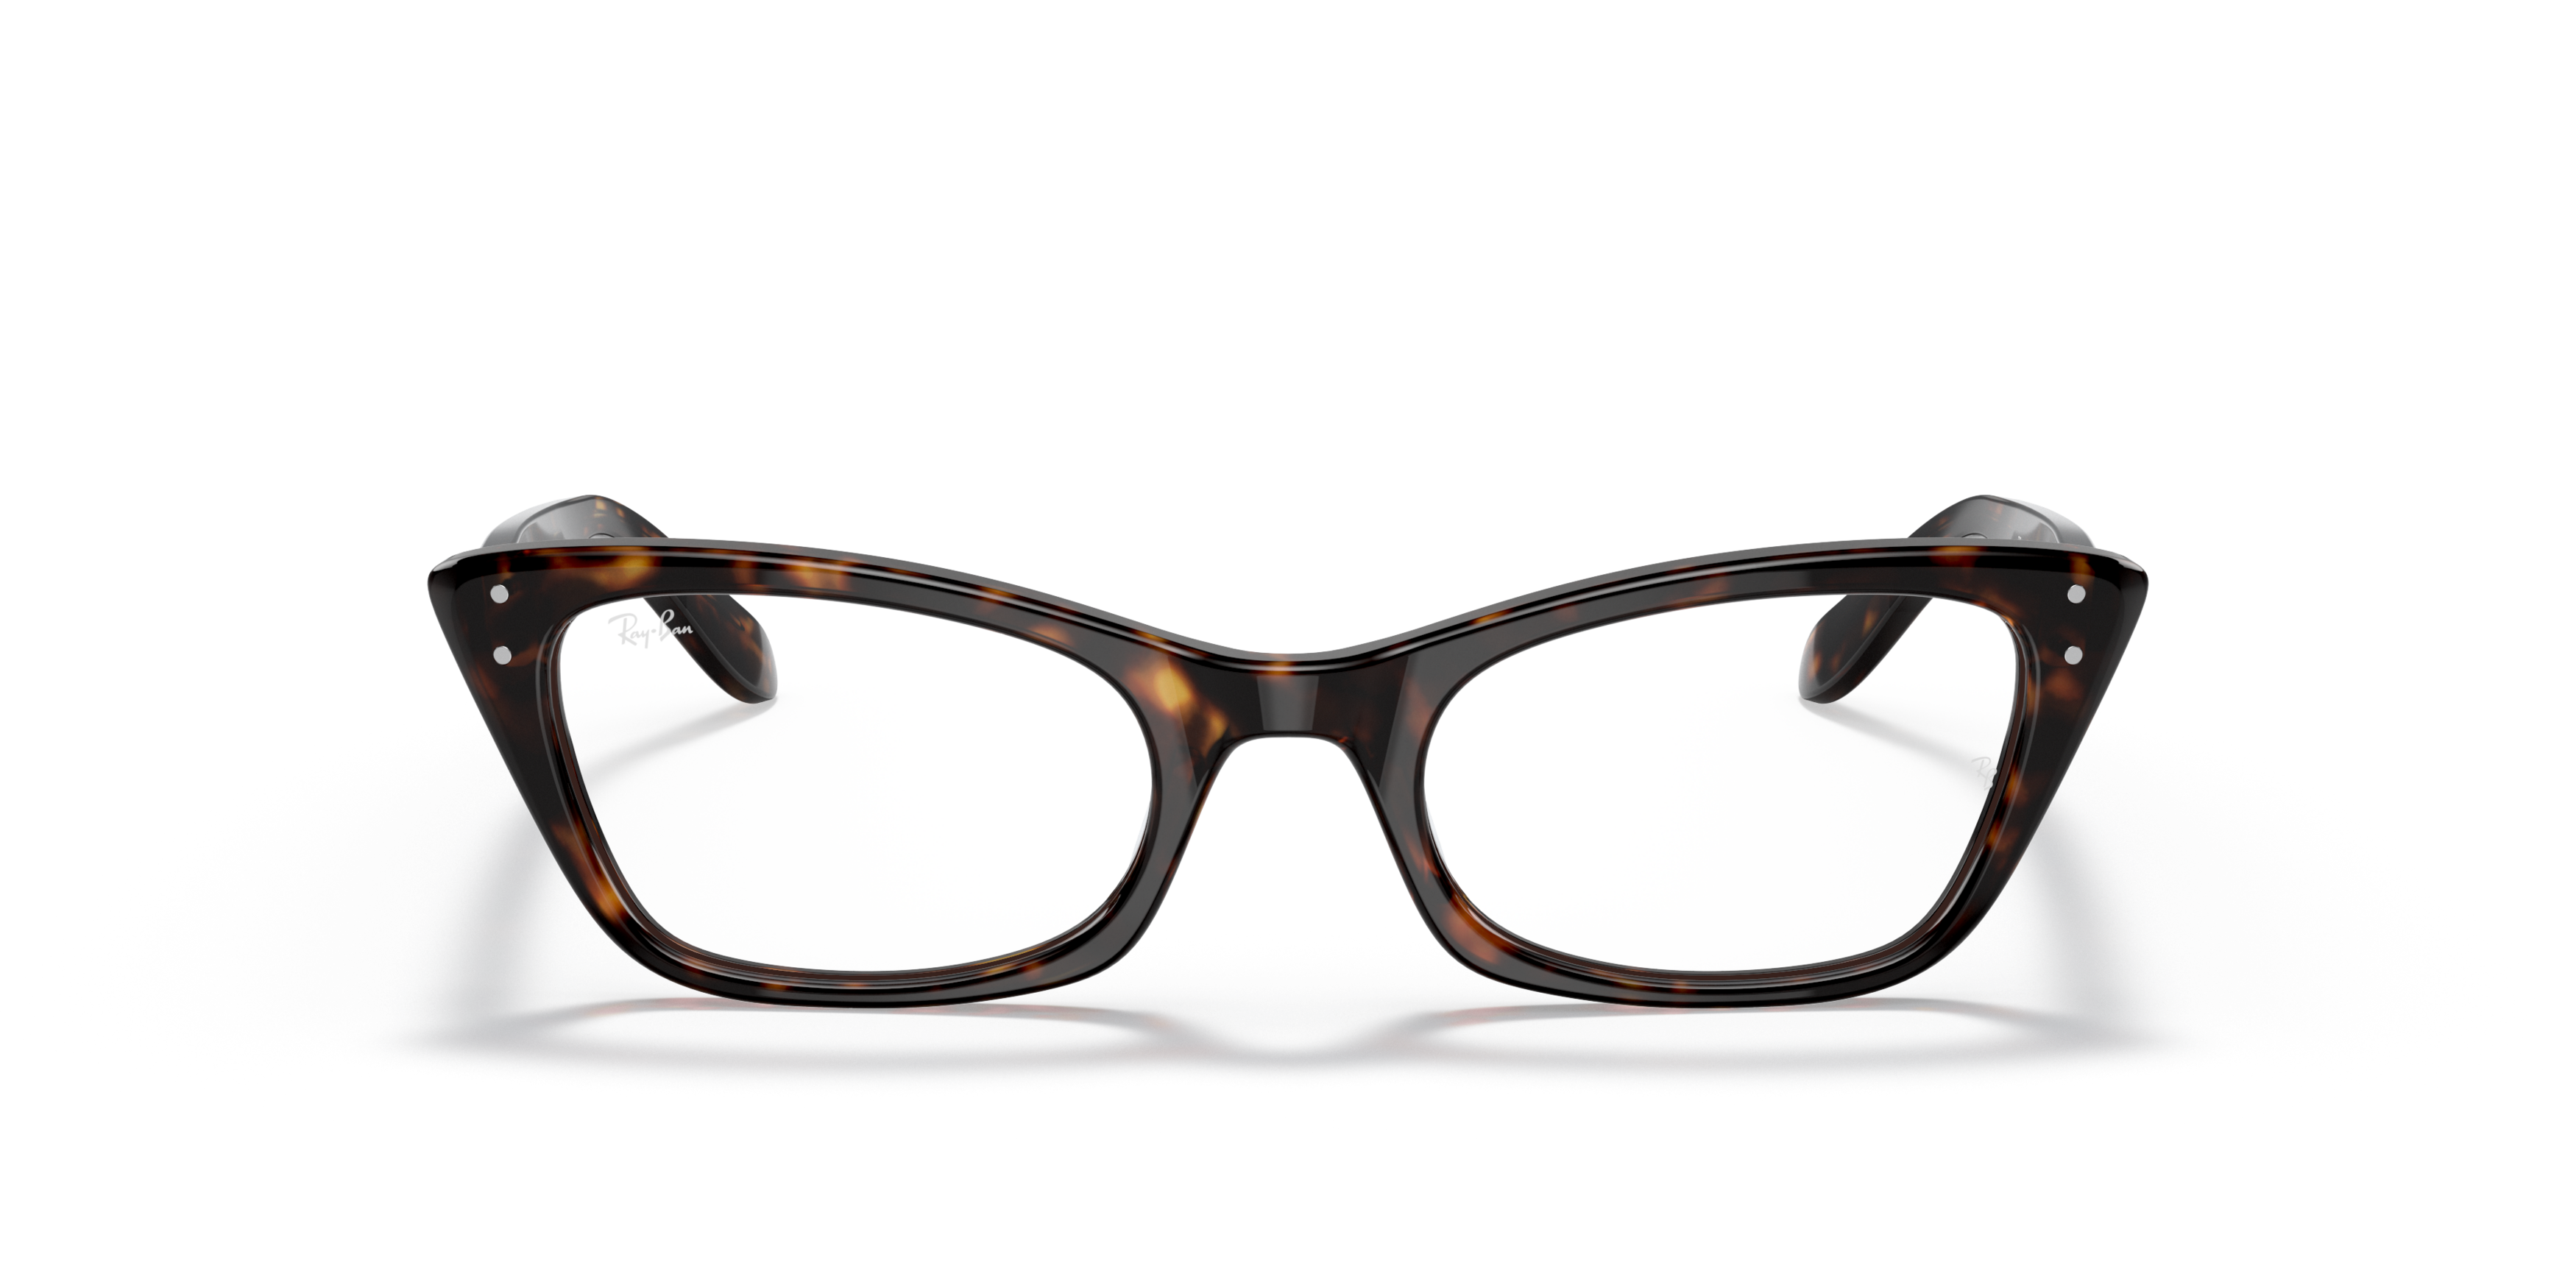 Front Ray-Ban Lady RX 5499 Glasses Transparent / Tortoise Shell